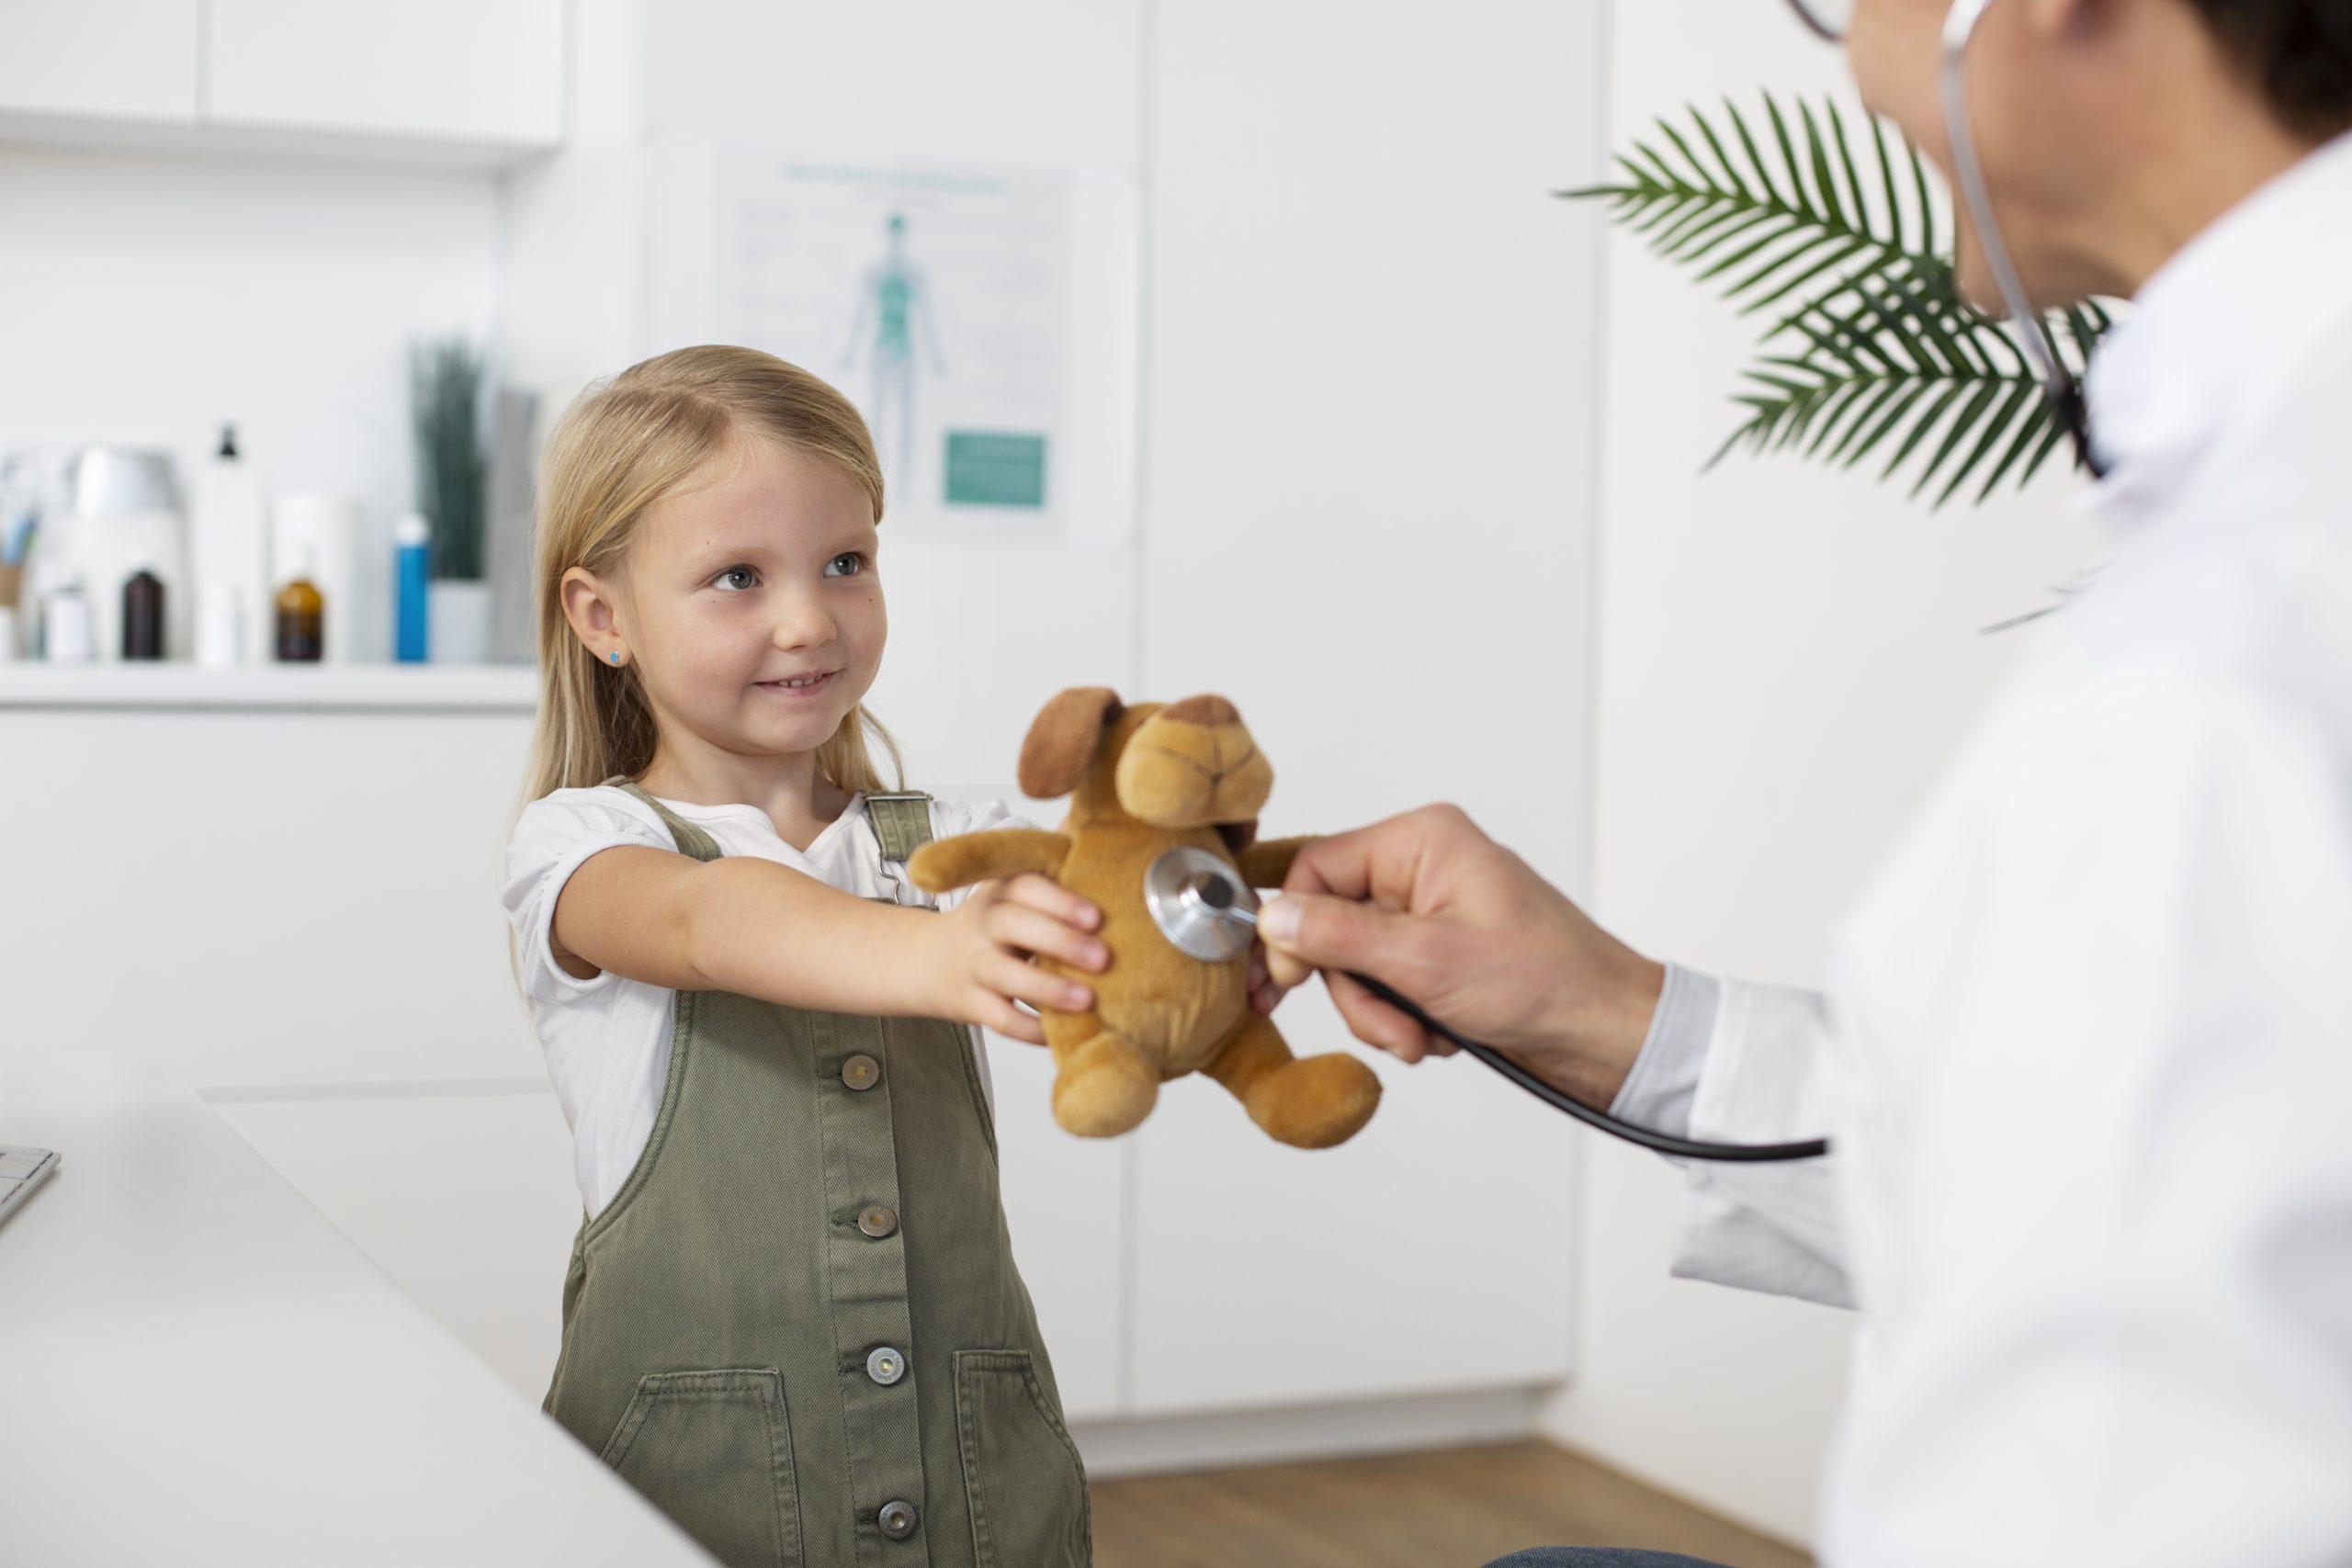 doctor using a stethoscope to examine a child holding a teddy bear, navigating severe food allergies in kids